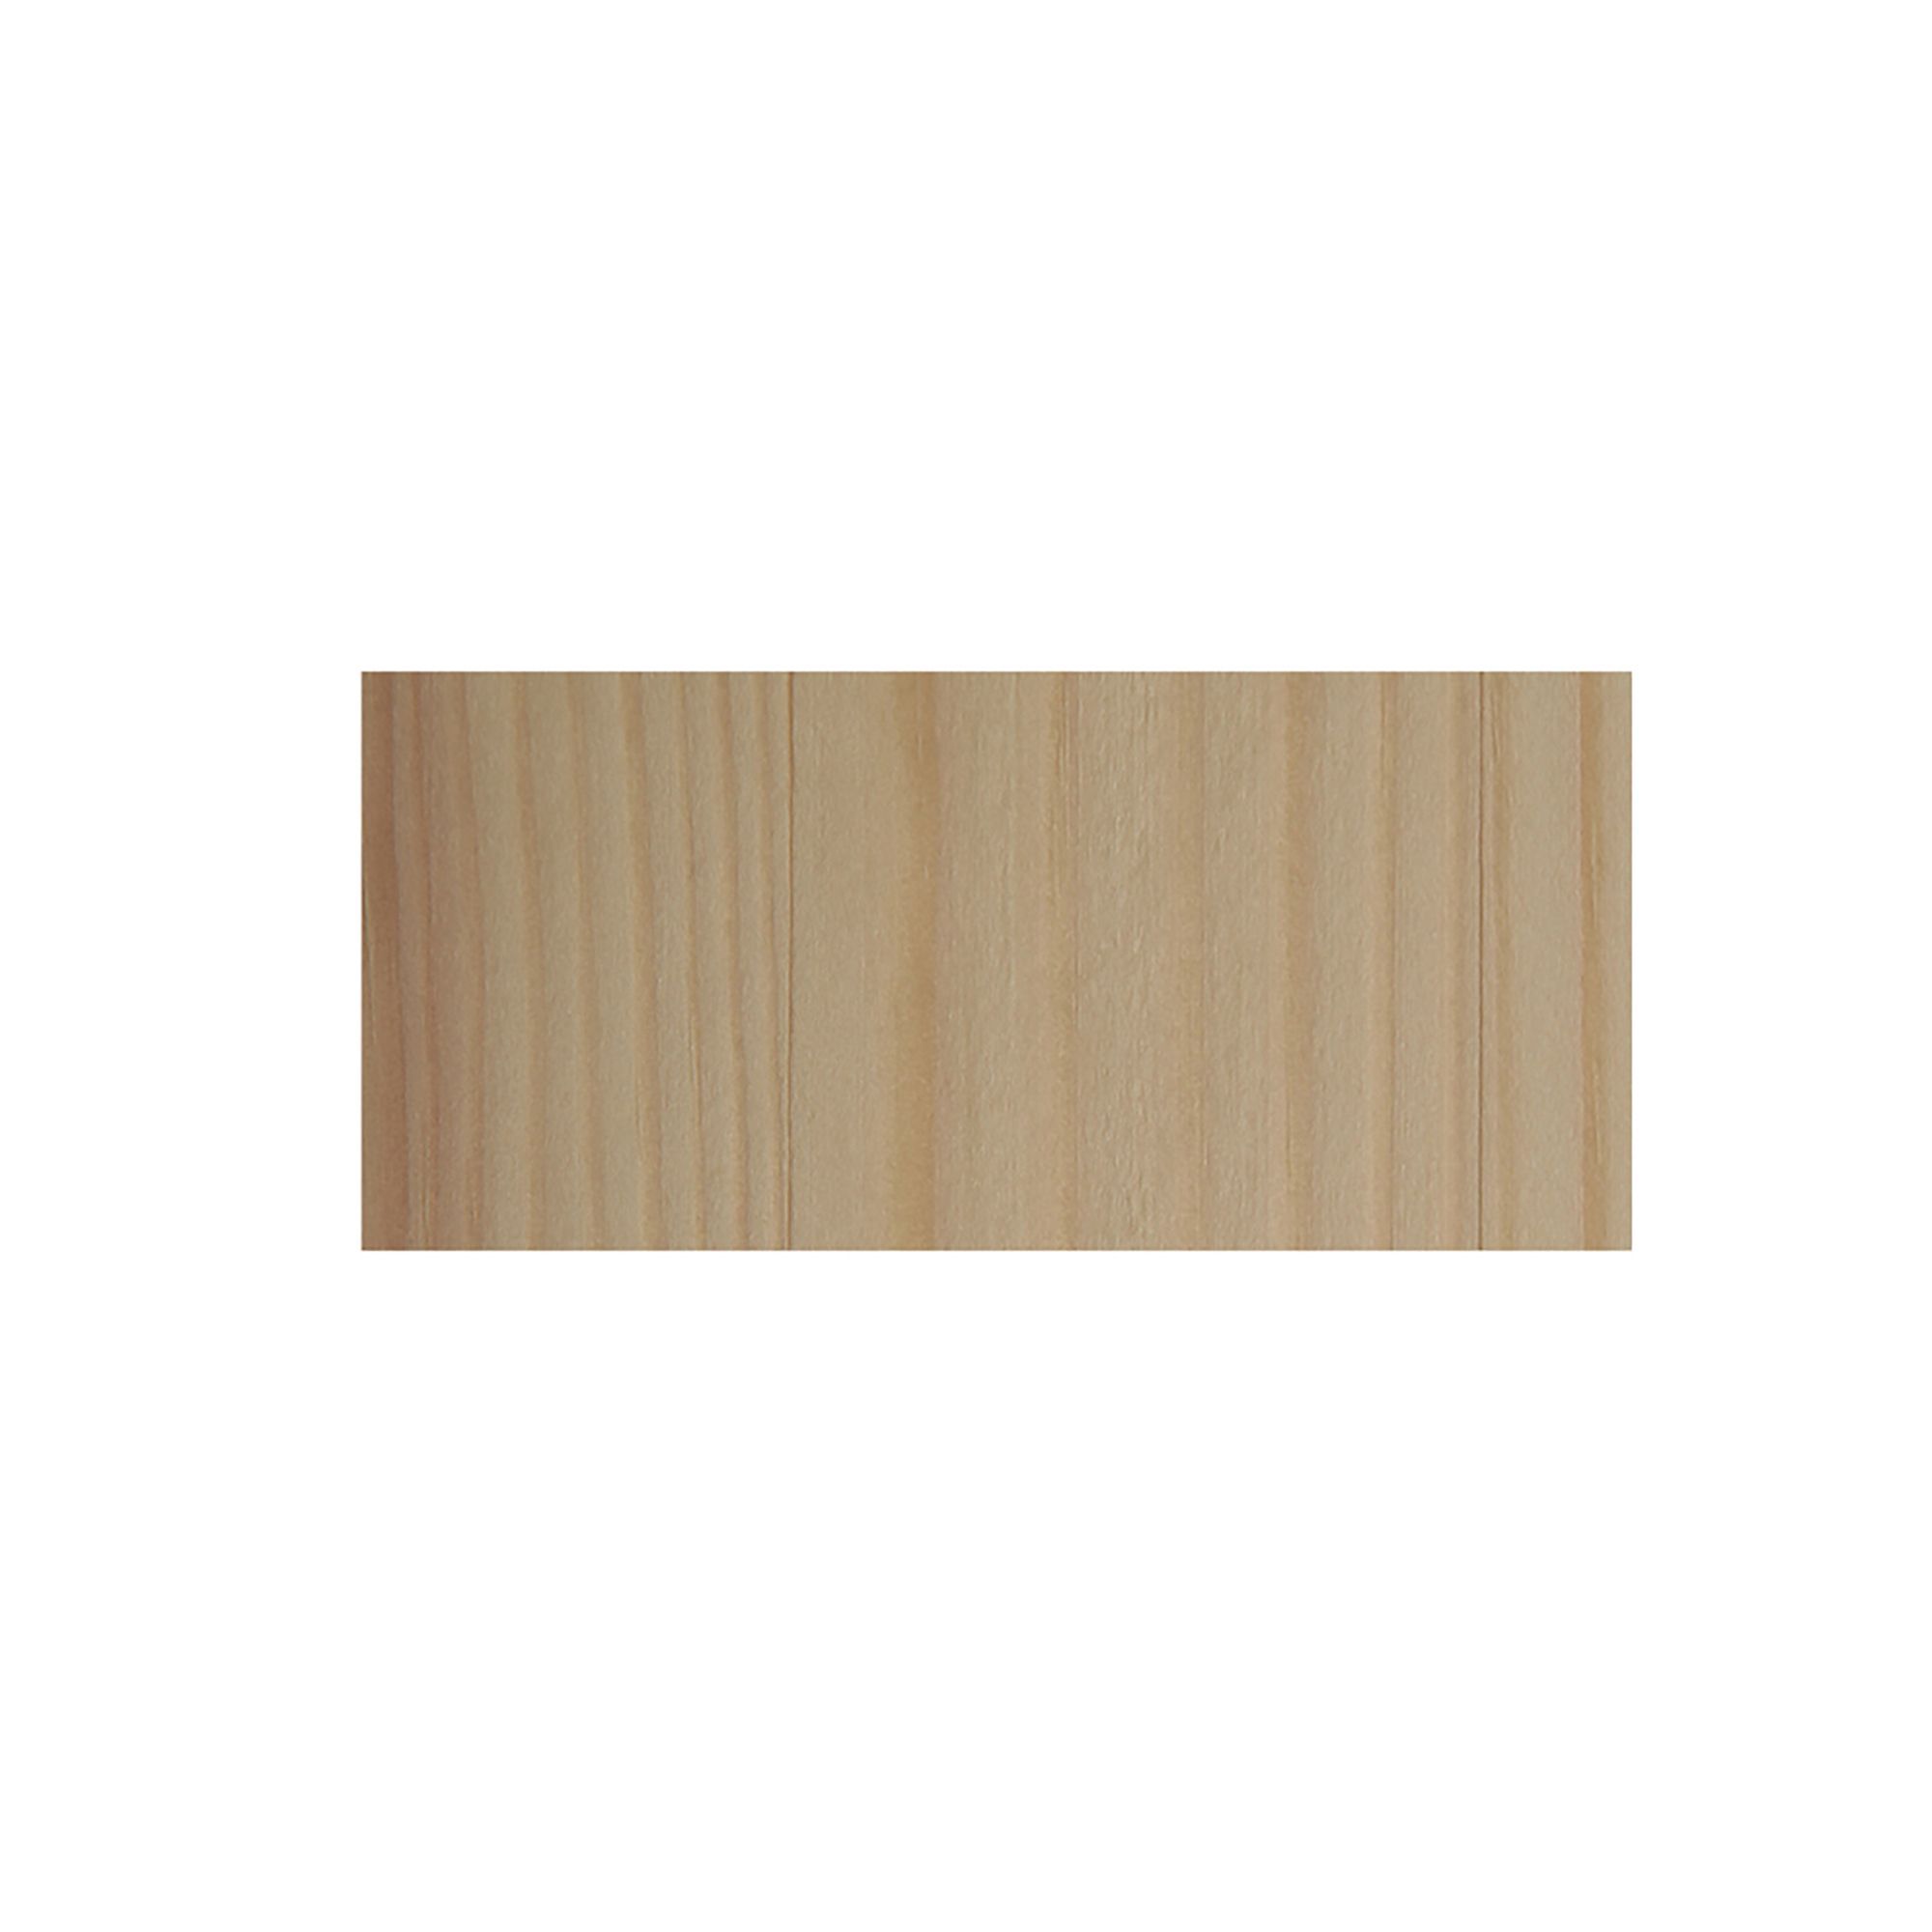 Cheshire Mouldings Smooth Planed Square edge Pine Stripwood (L)0.9m (W)15mm (T)6mm STPN36